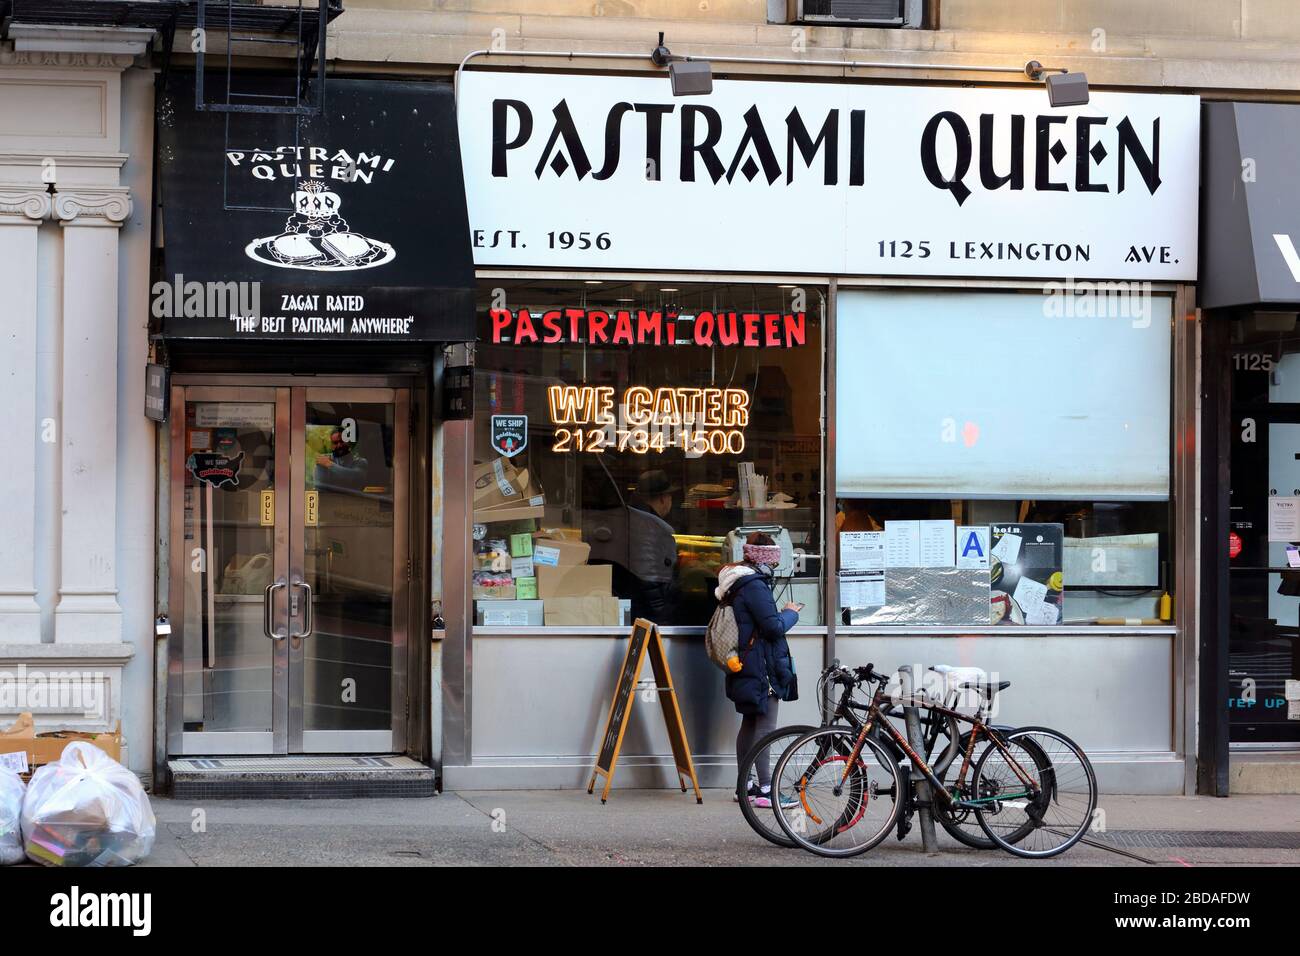 Pastrami Queen, 1125 Lexington Ave, New York, NY. exterior storefront of a kosher jewish deli on the Upper East Side of Manhattan. Stock Photo